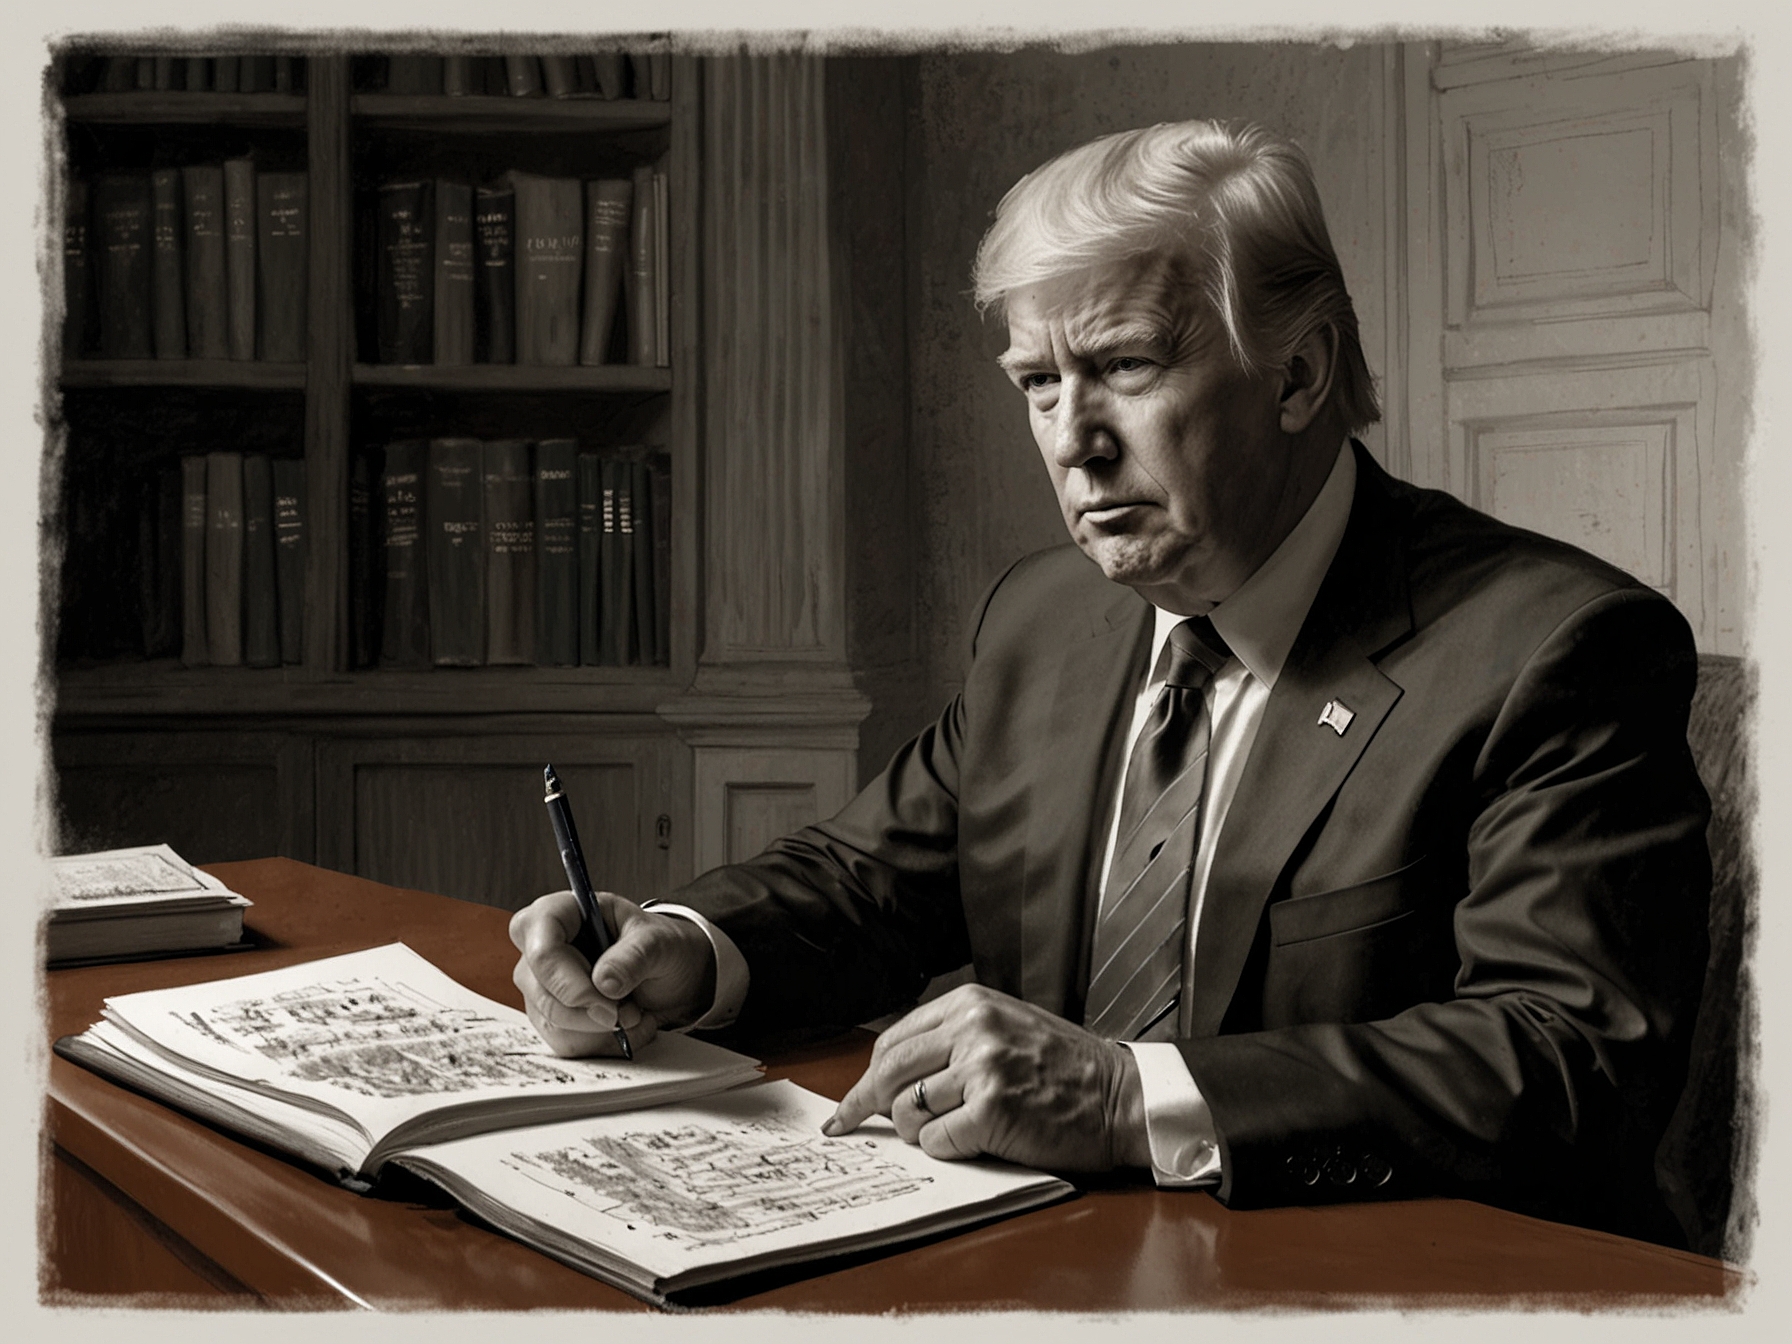 Trump studies detailed notes and works with advisers, refining his attack lines and counterpoints for the upcoming debate to highlight his policy successes and challenge Biden's administration.